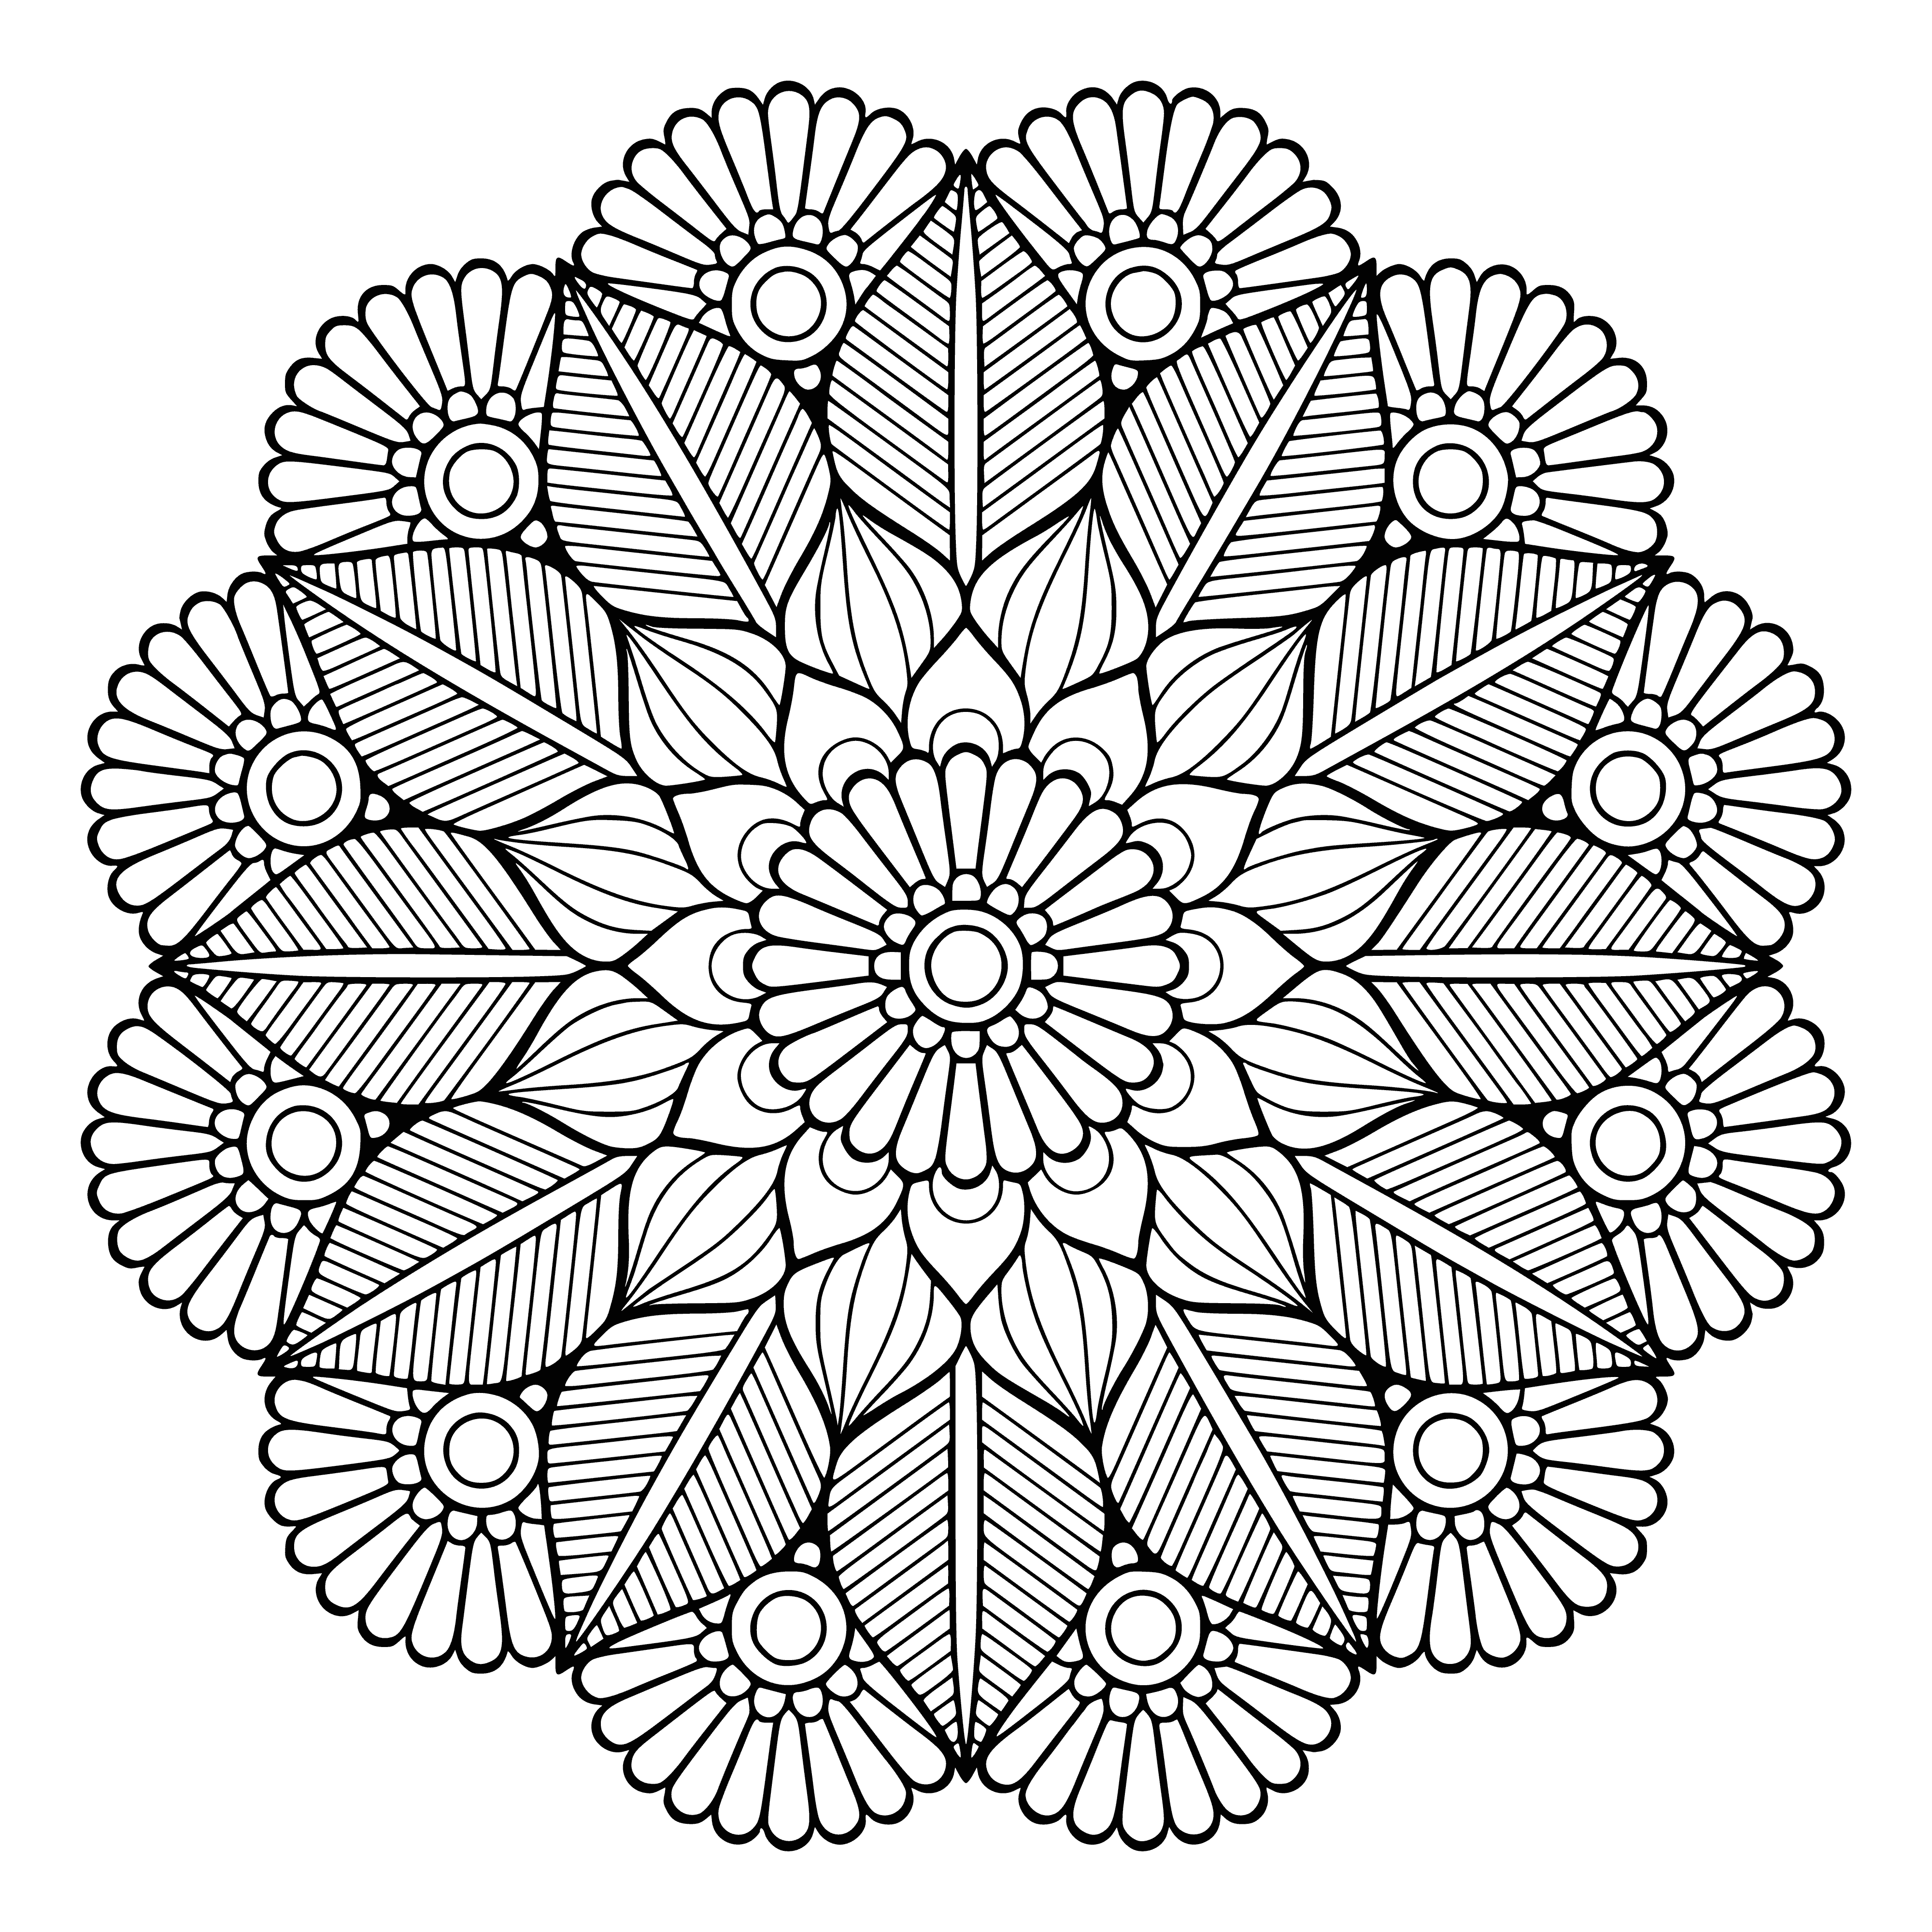 coloring page: Colorful flower mandalas with 8-5 petals, differing shades of pink/purple/blue, & small green leaves in the center.